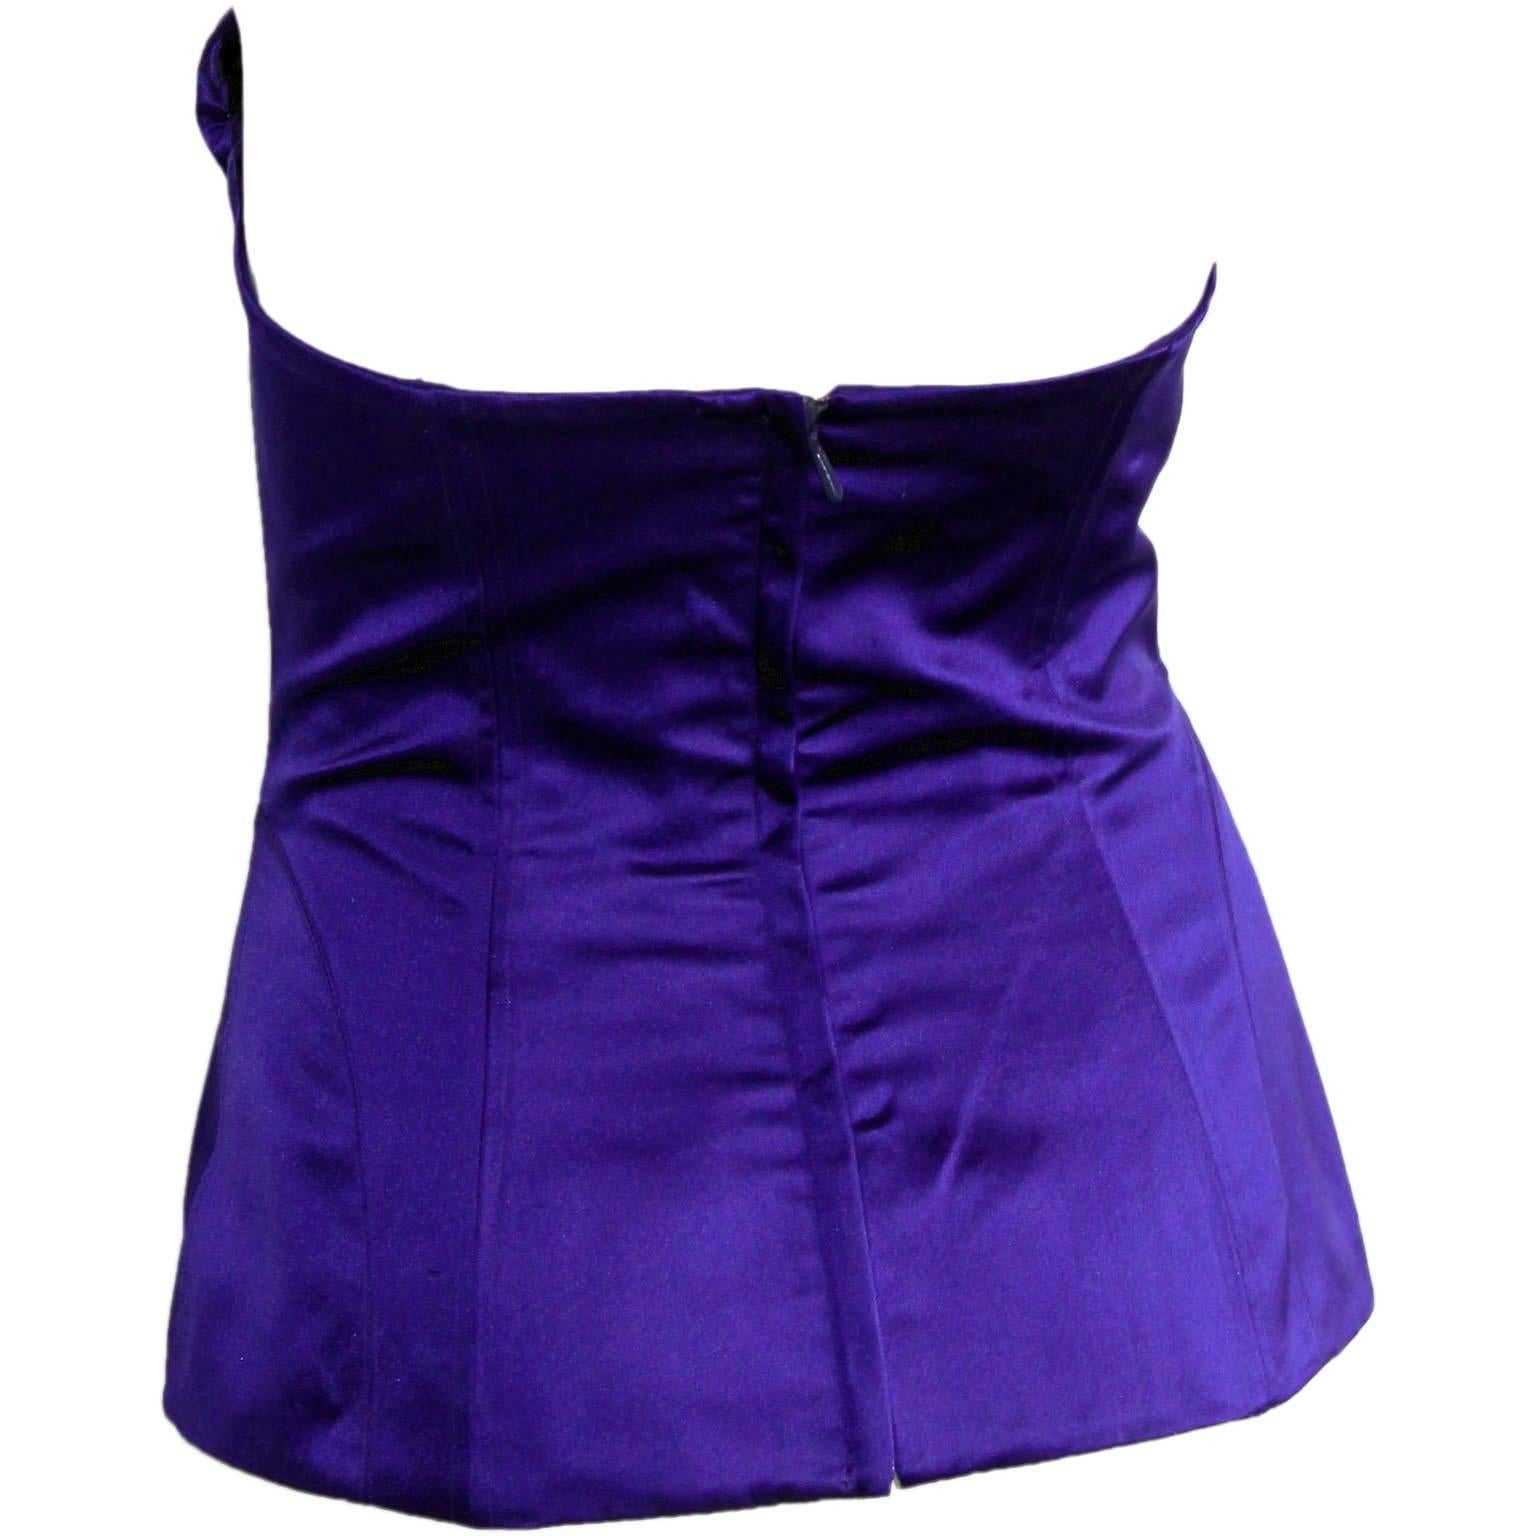 Rare And Iconic Tom Ford For Gucci Spring Summer 2001 Electric Blue Silk Satin Corset Top!

Who could ever forget that heavenly electric blue silk corset/bustier top from Tom Ford's incredible spring/summer 2001 collection for Gucci? Hugely sought